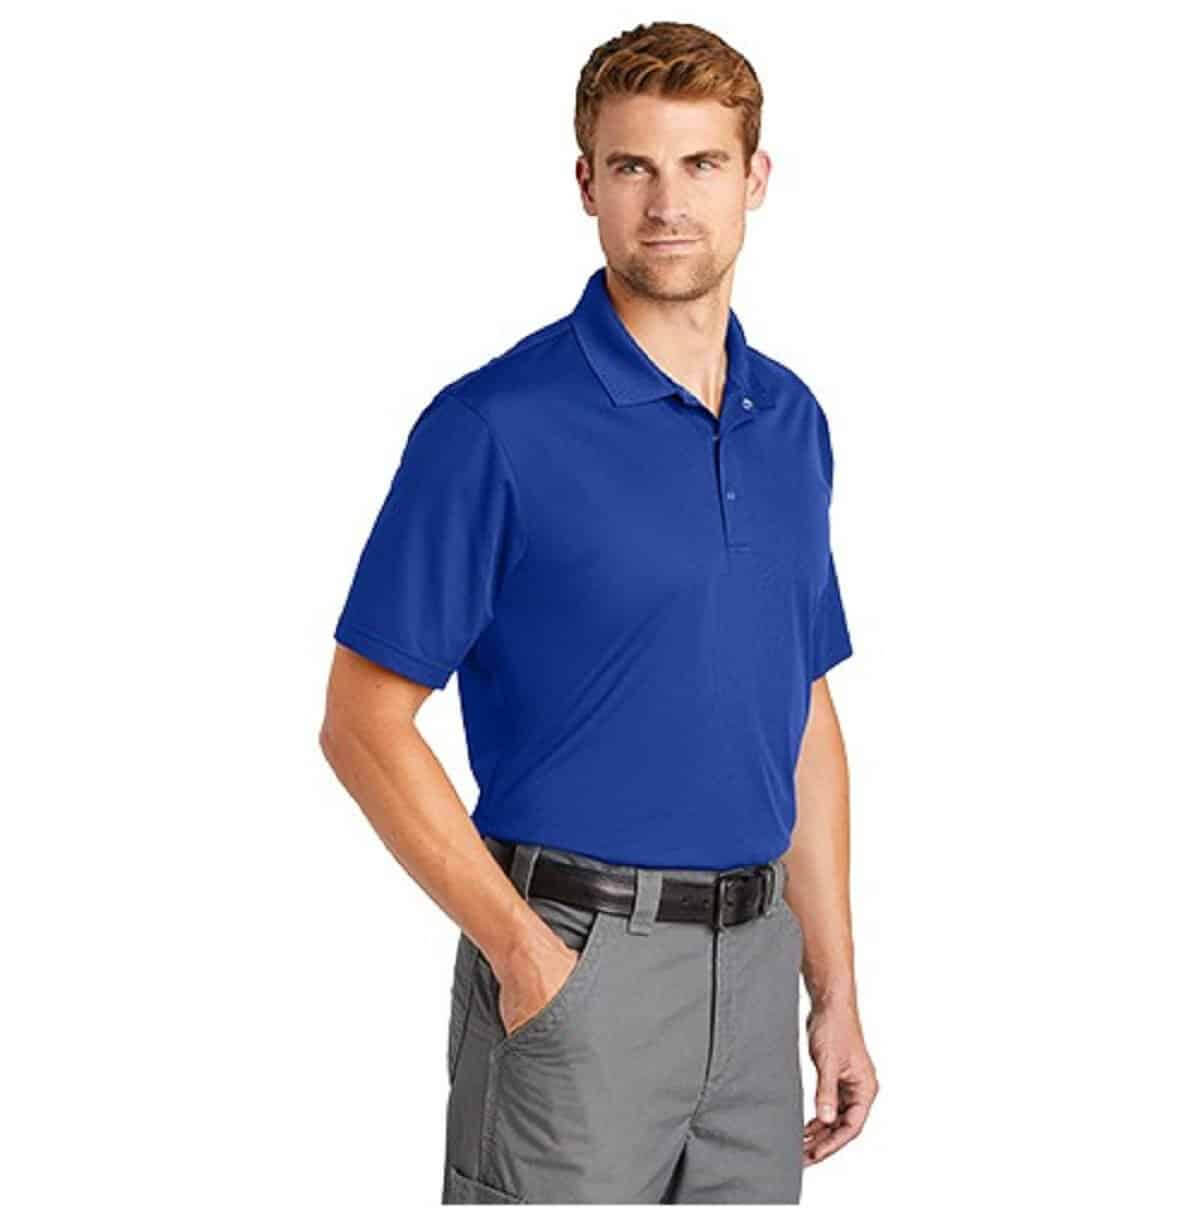 Tips for Selecting A Blank Polo Shirt